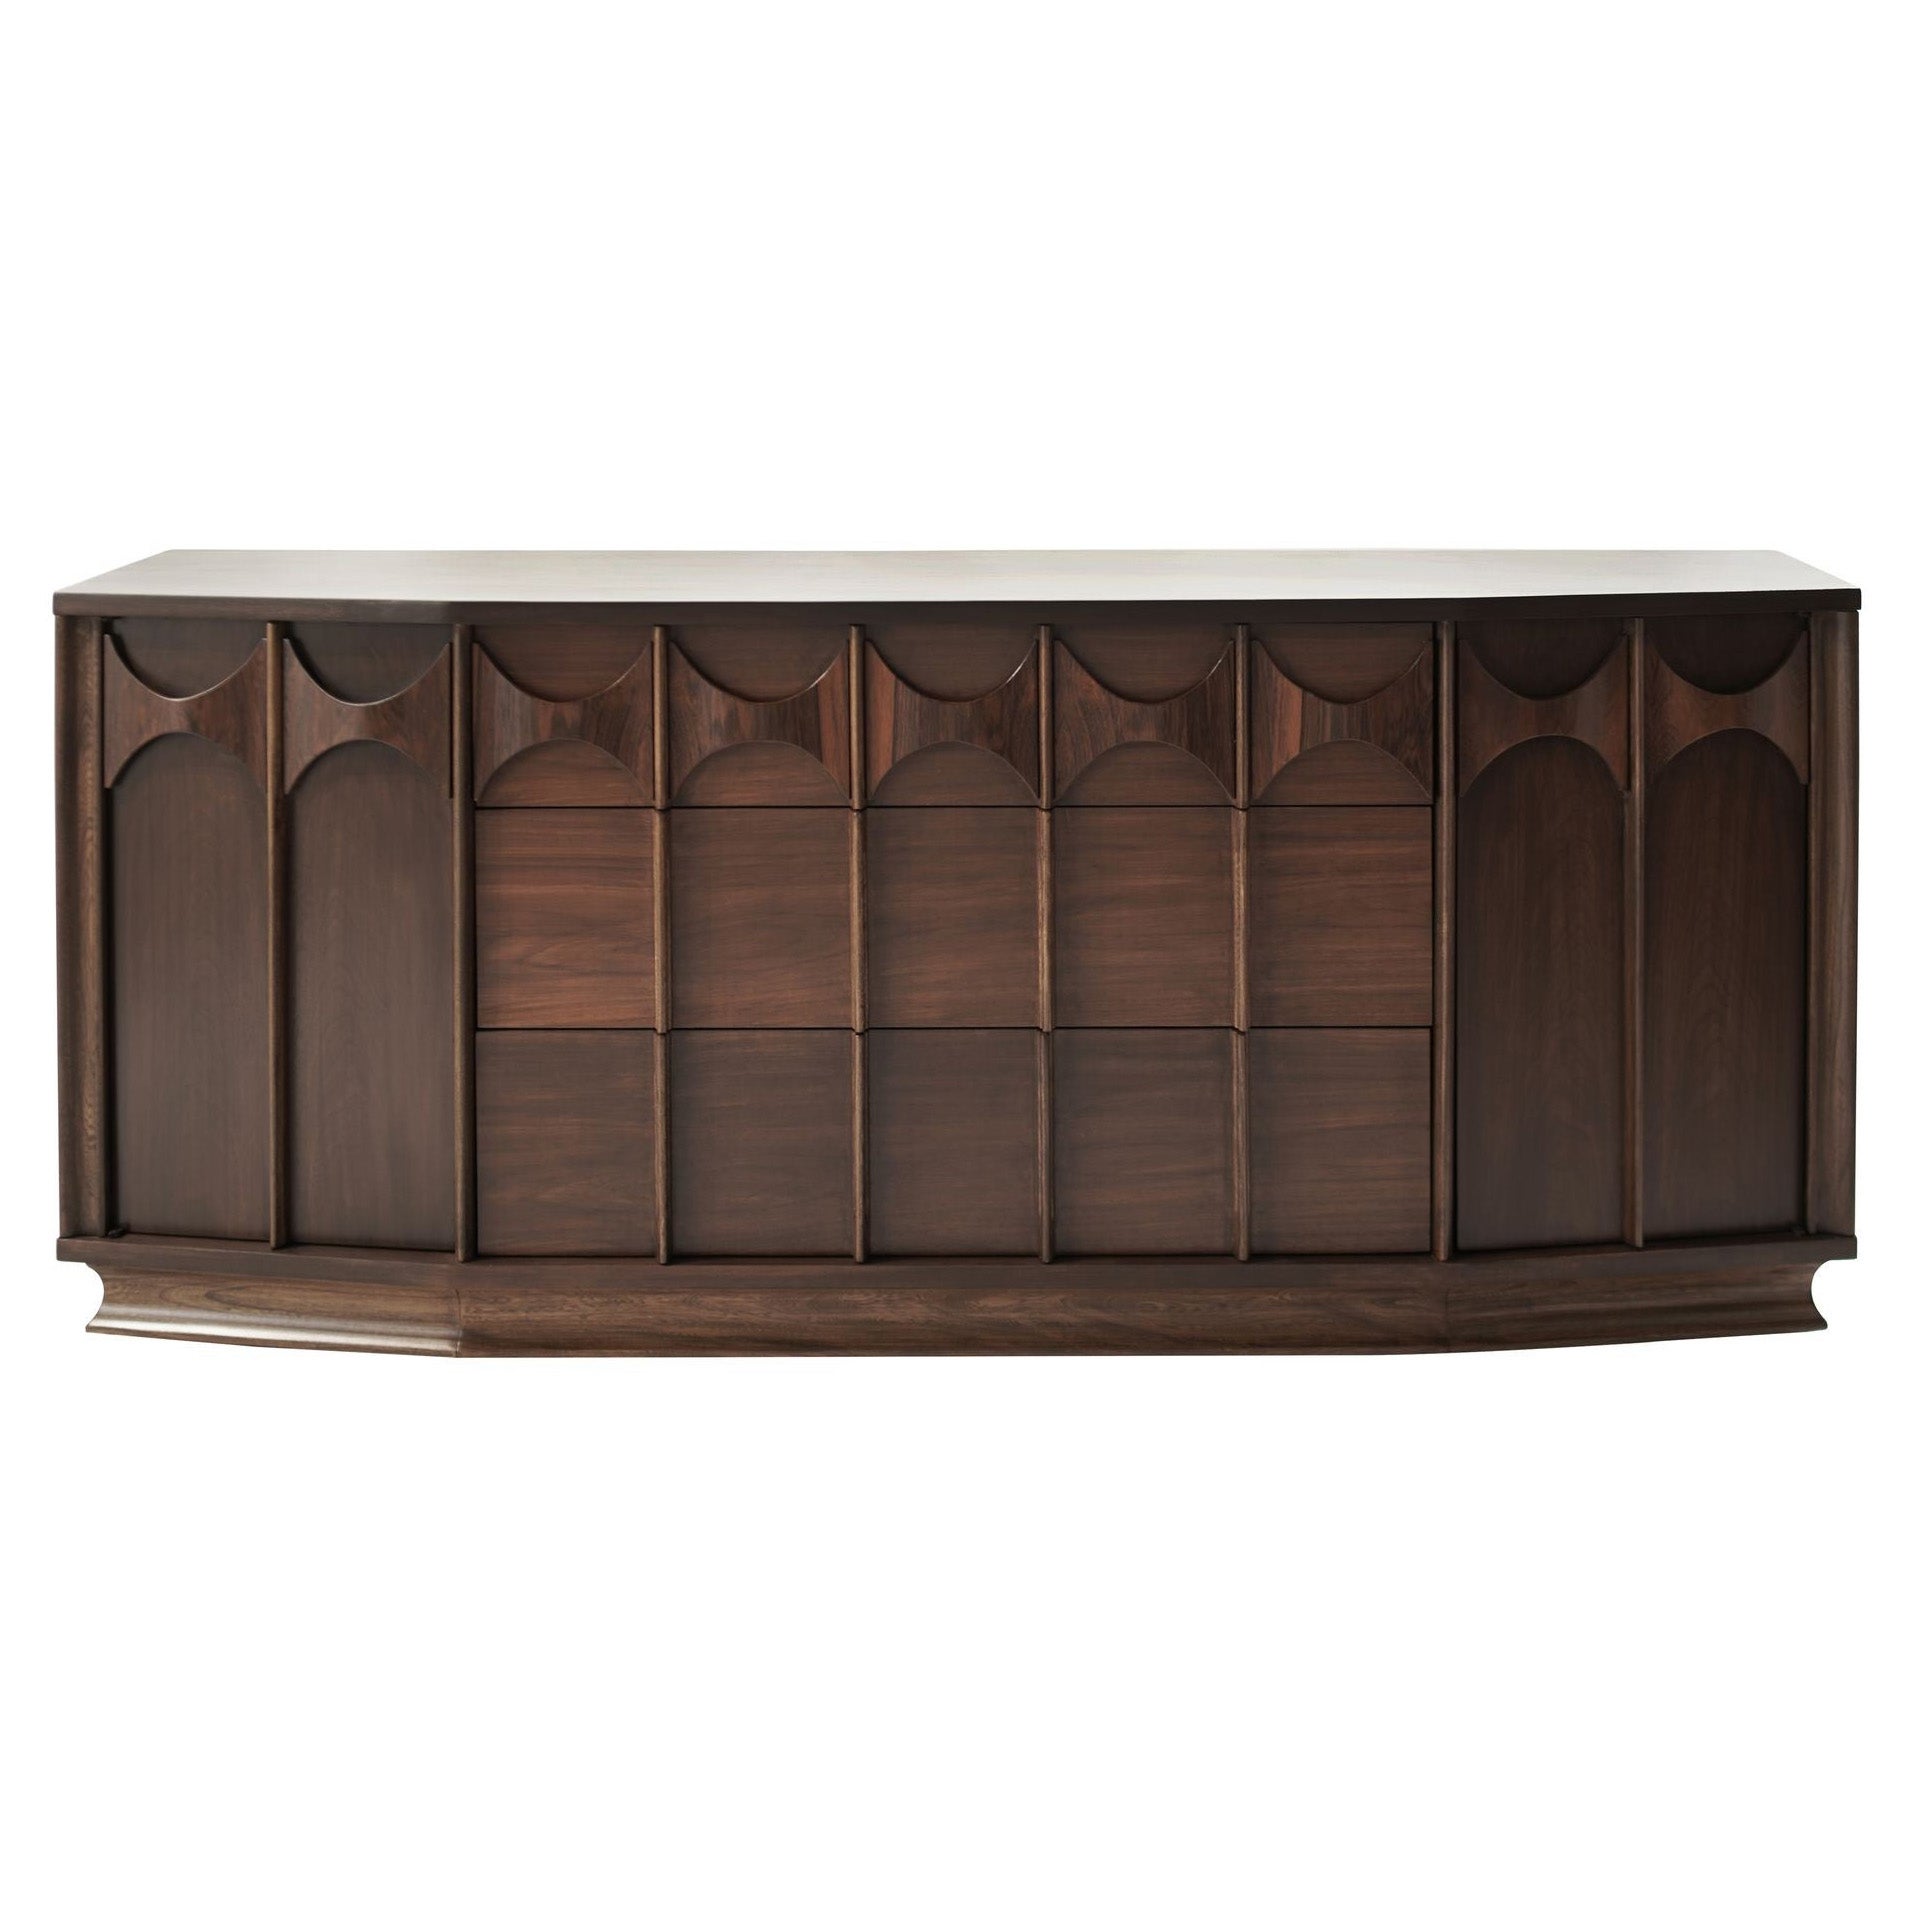 Kent Coffey Perspecta Collection Walnut and Rosewood Dresser, C. 1950s